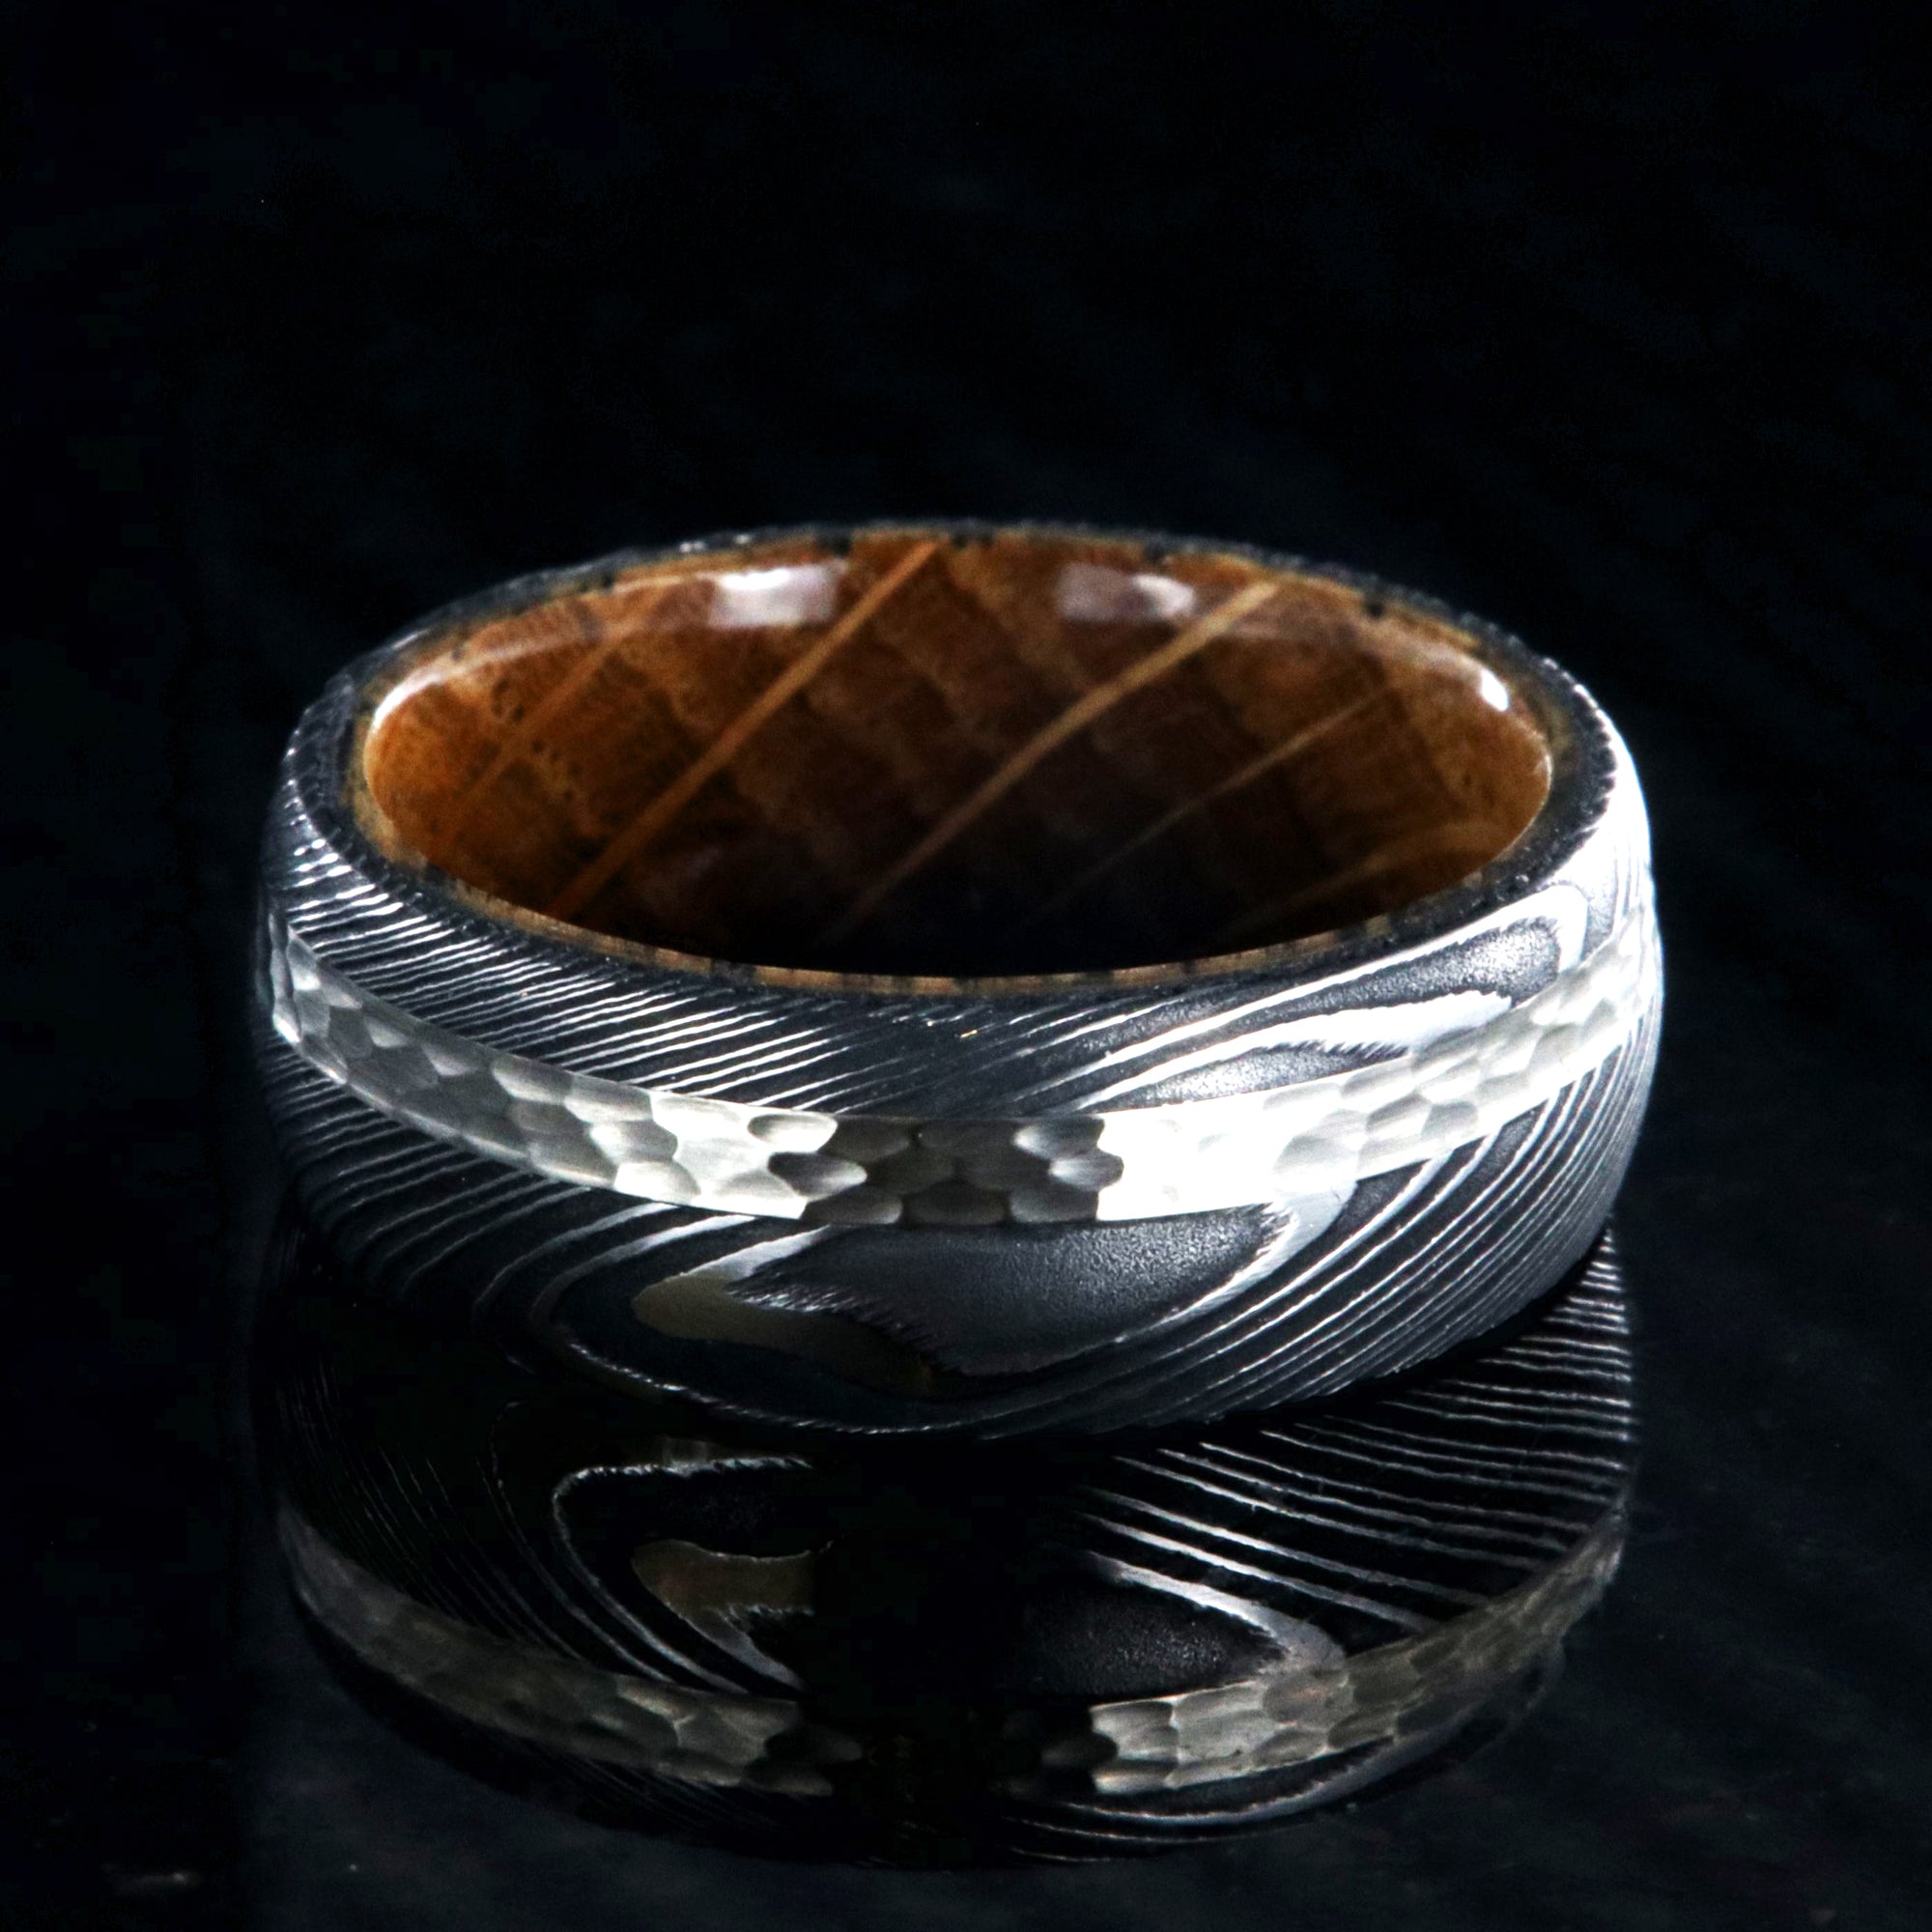 8mm wide black Damascus steel ring with a 2mm wide hammered white gold inlay and a whiskey barrel sleeve